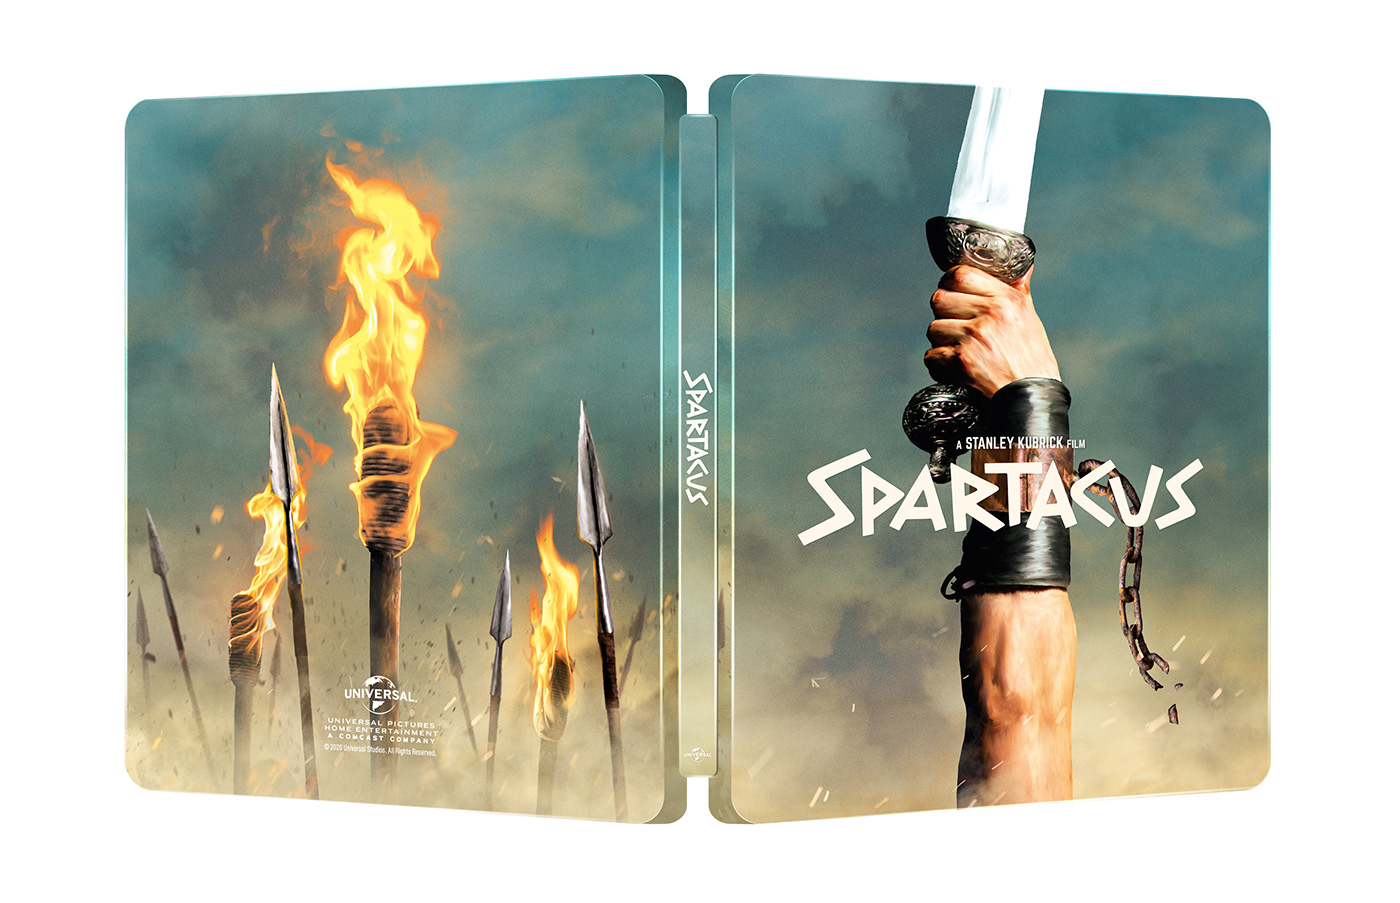 Digitall painted, limited edition steelbook design celebrating the 60th anniversary of Spartacus.